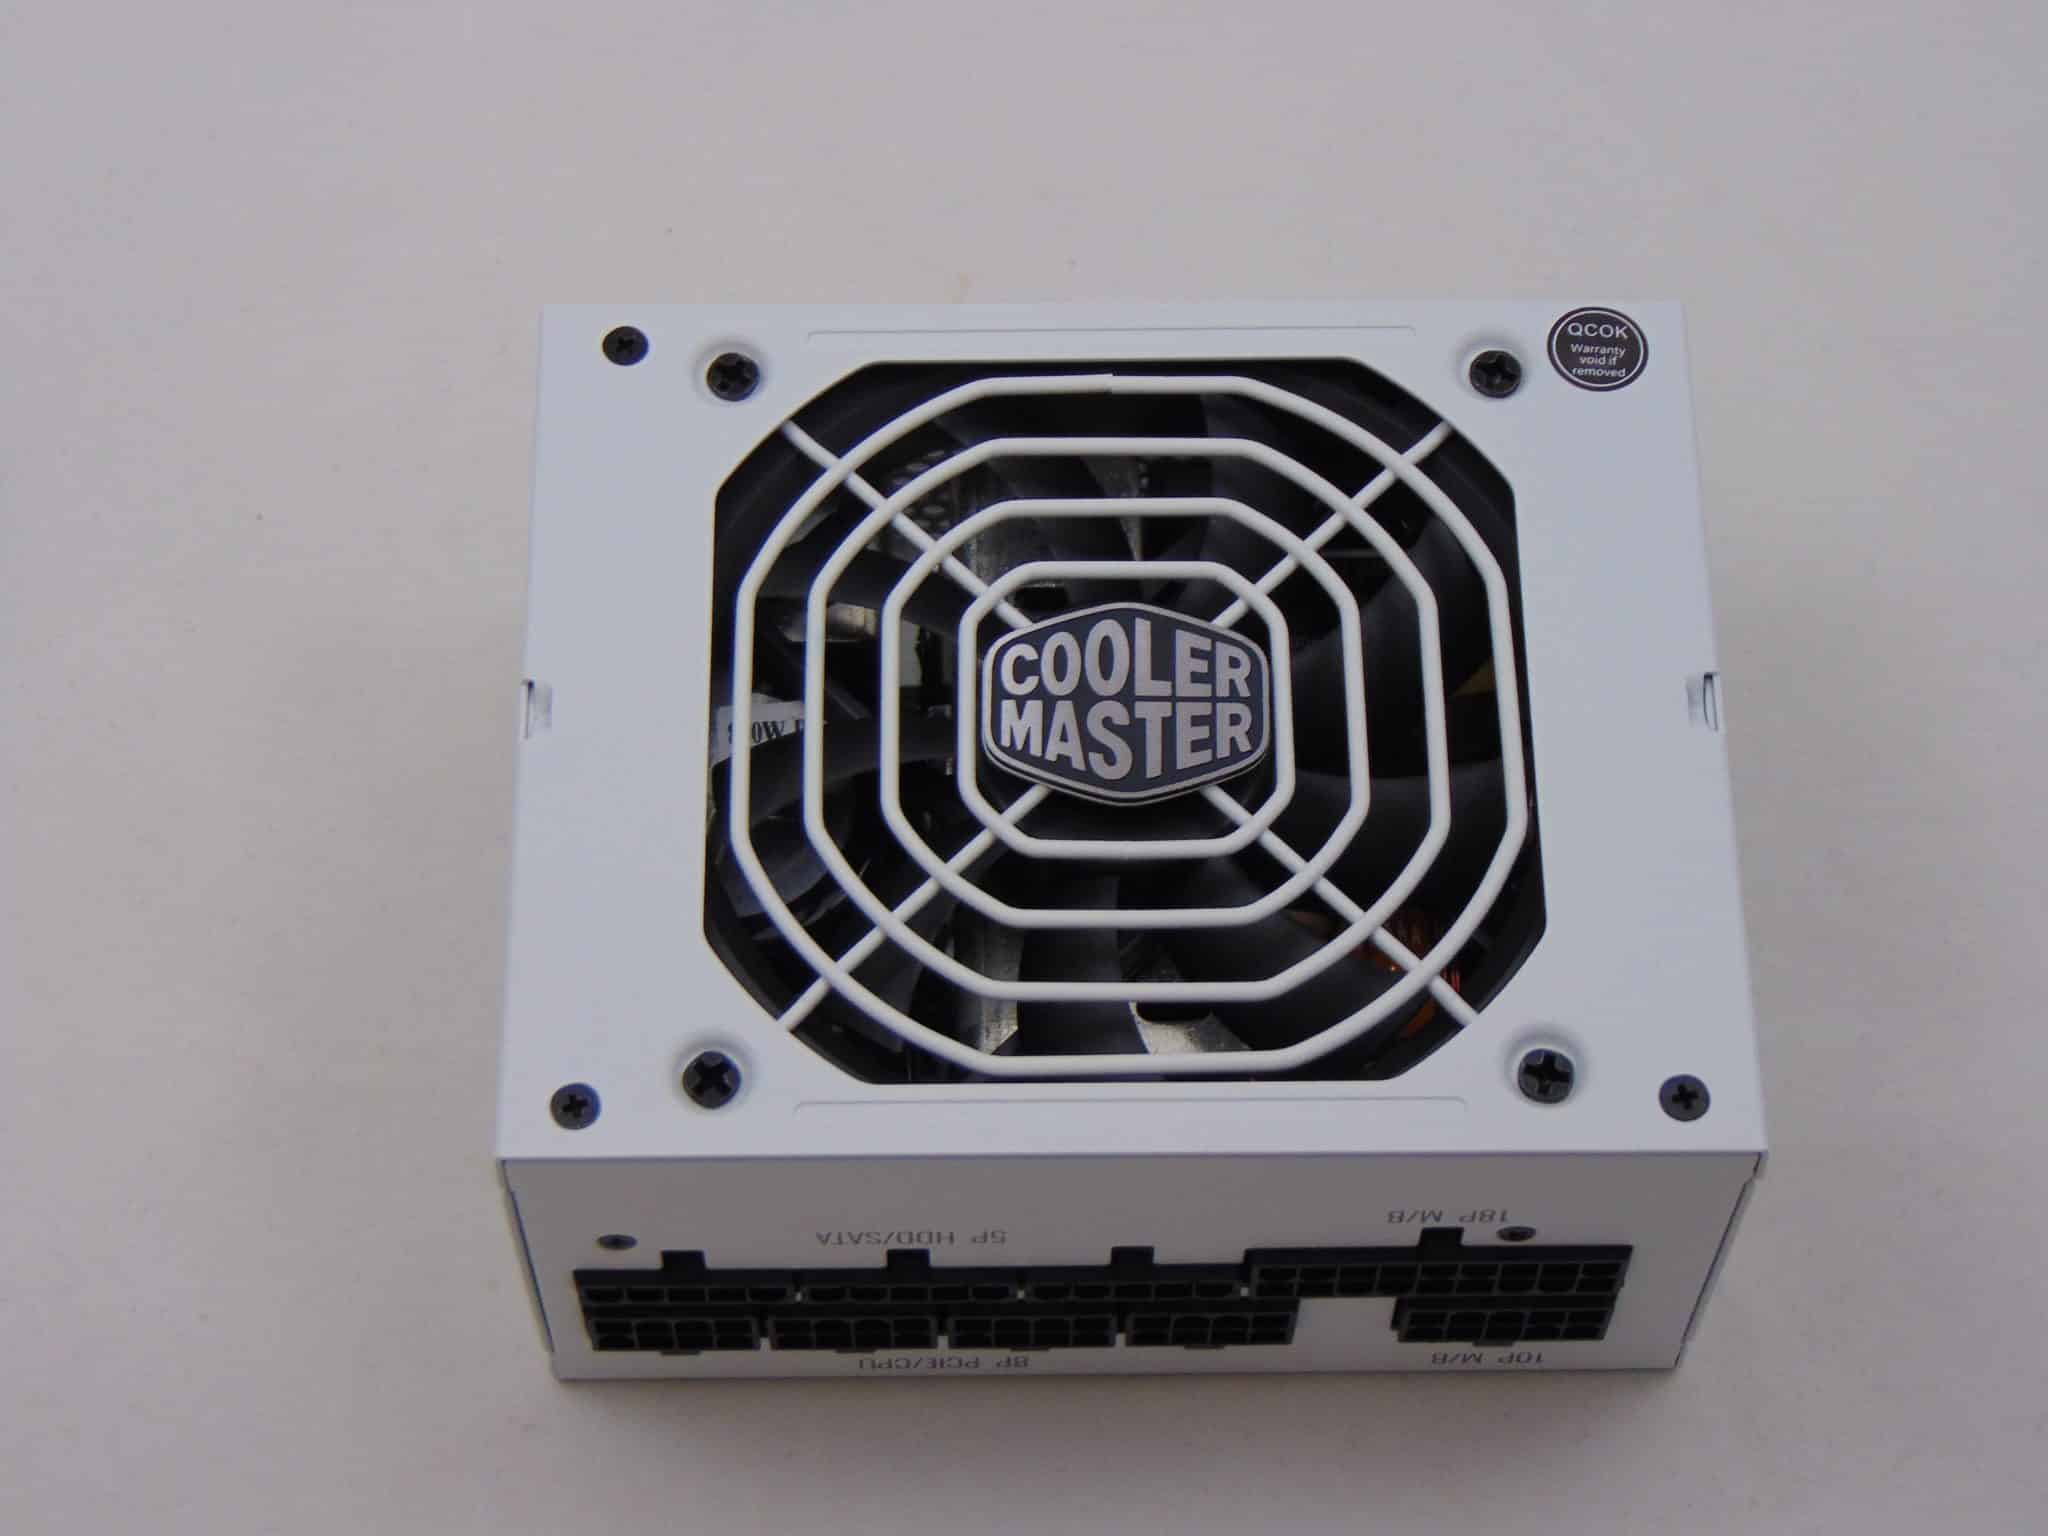 Cooler Master V850 SFX Gold WHITE Edition 850W Power Supply Review 